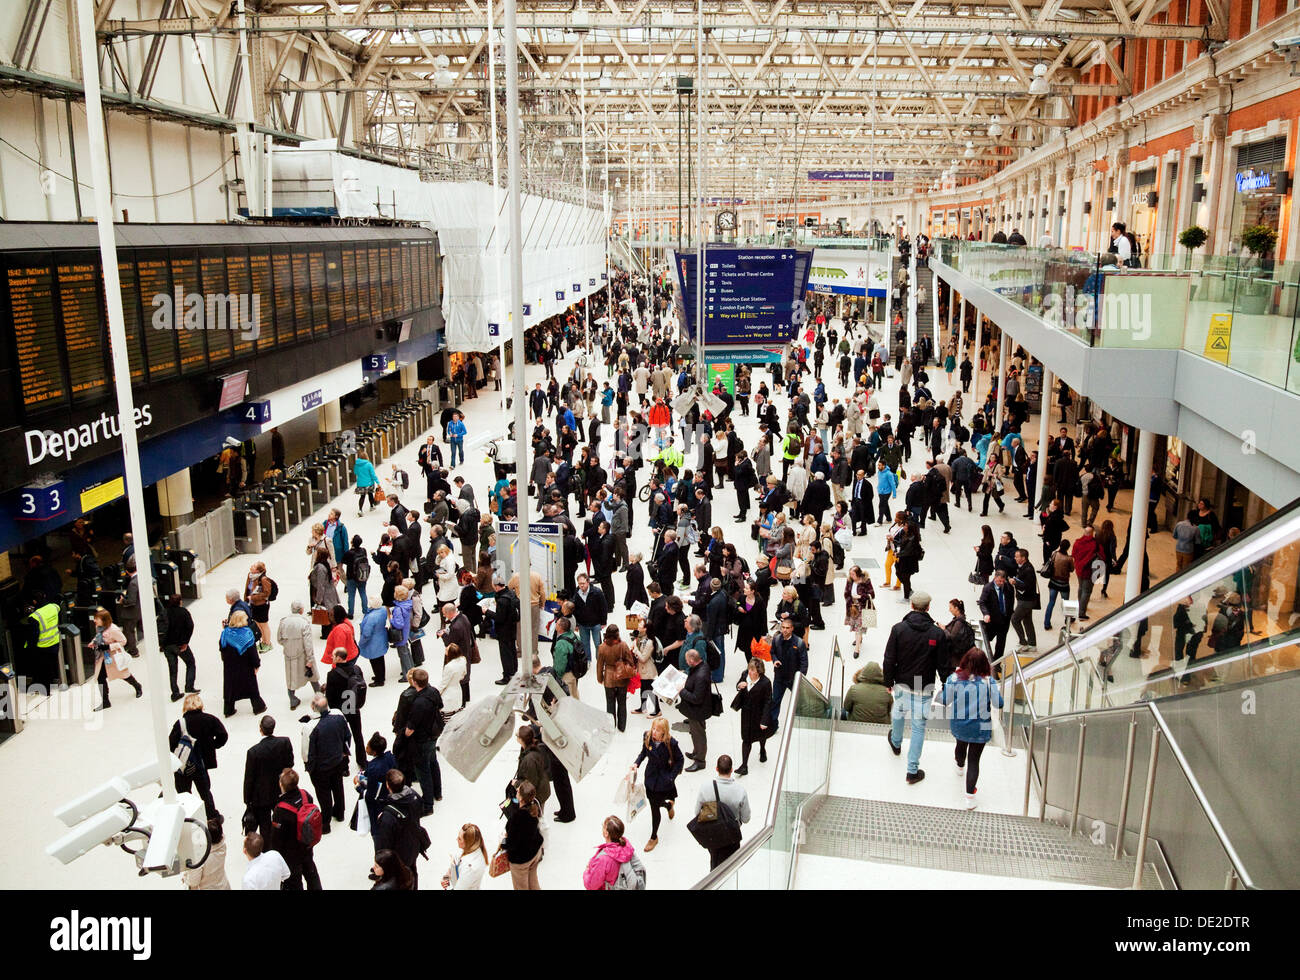 Waterloo station concourse; Crowd of people at evening rush hour, London England UK Stock Photo